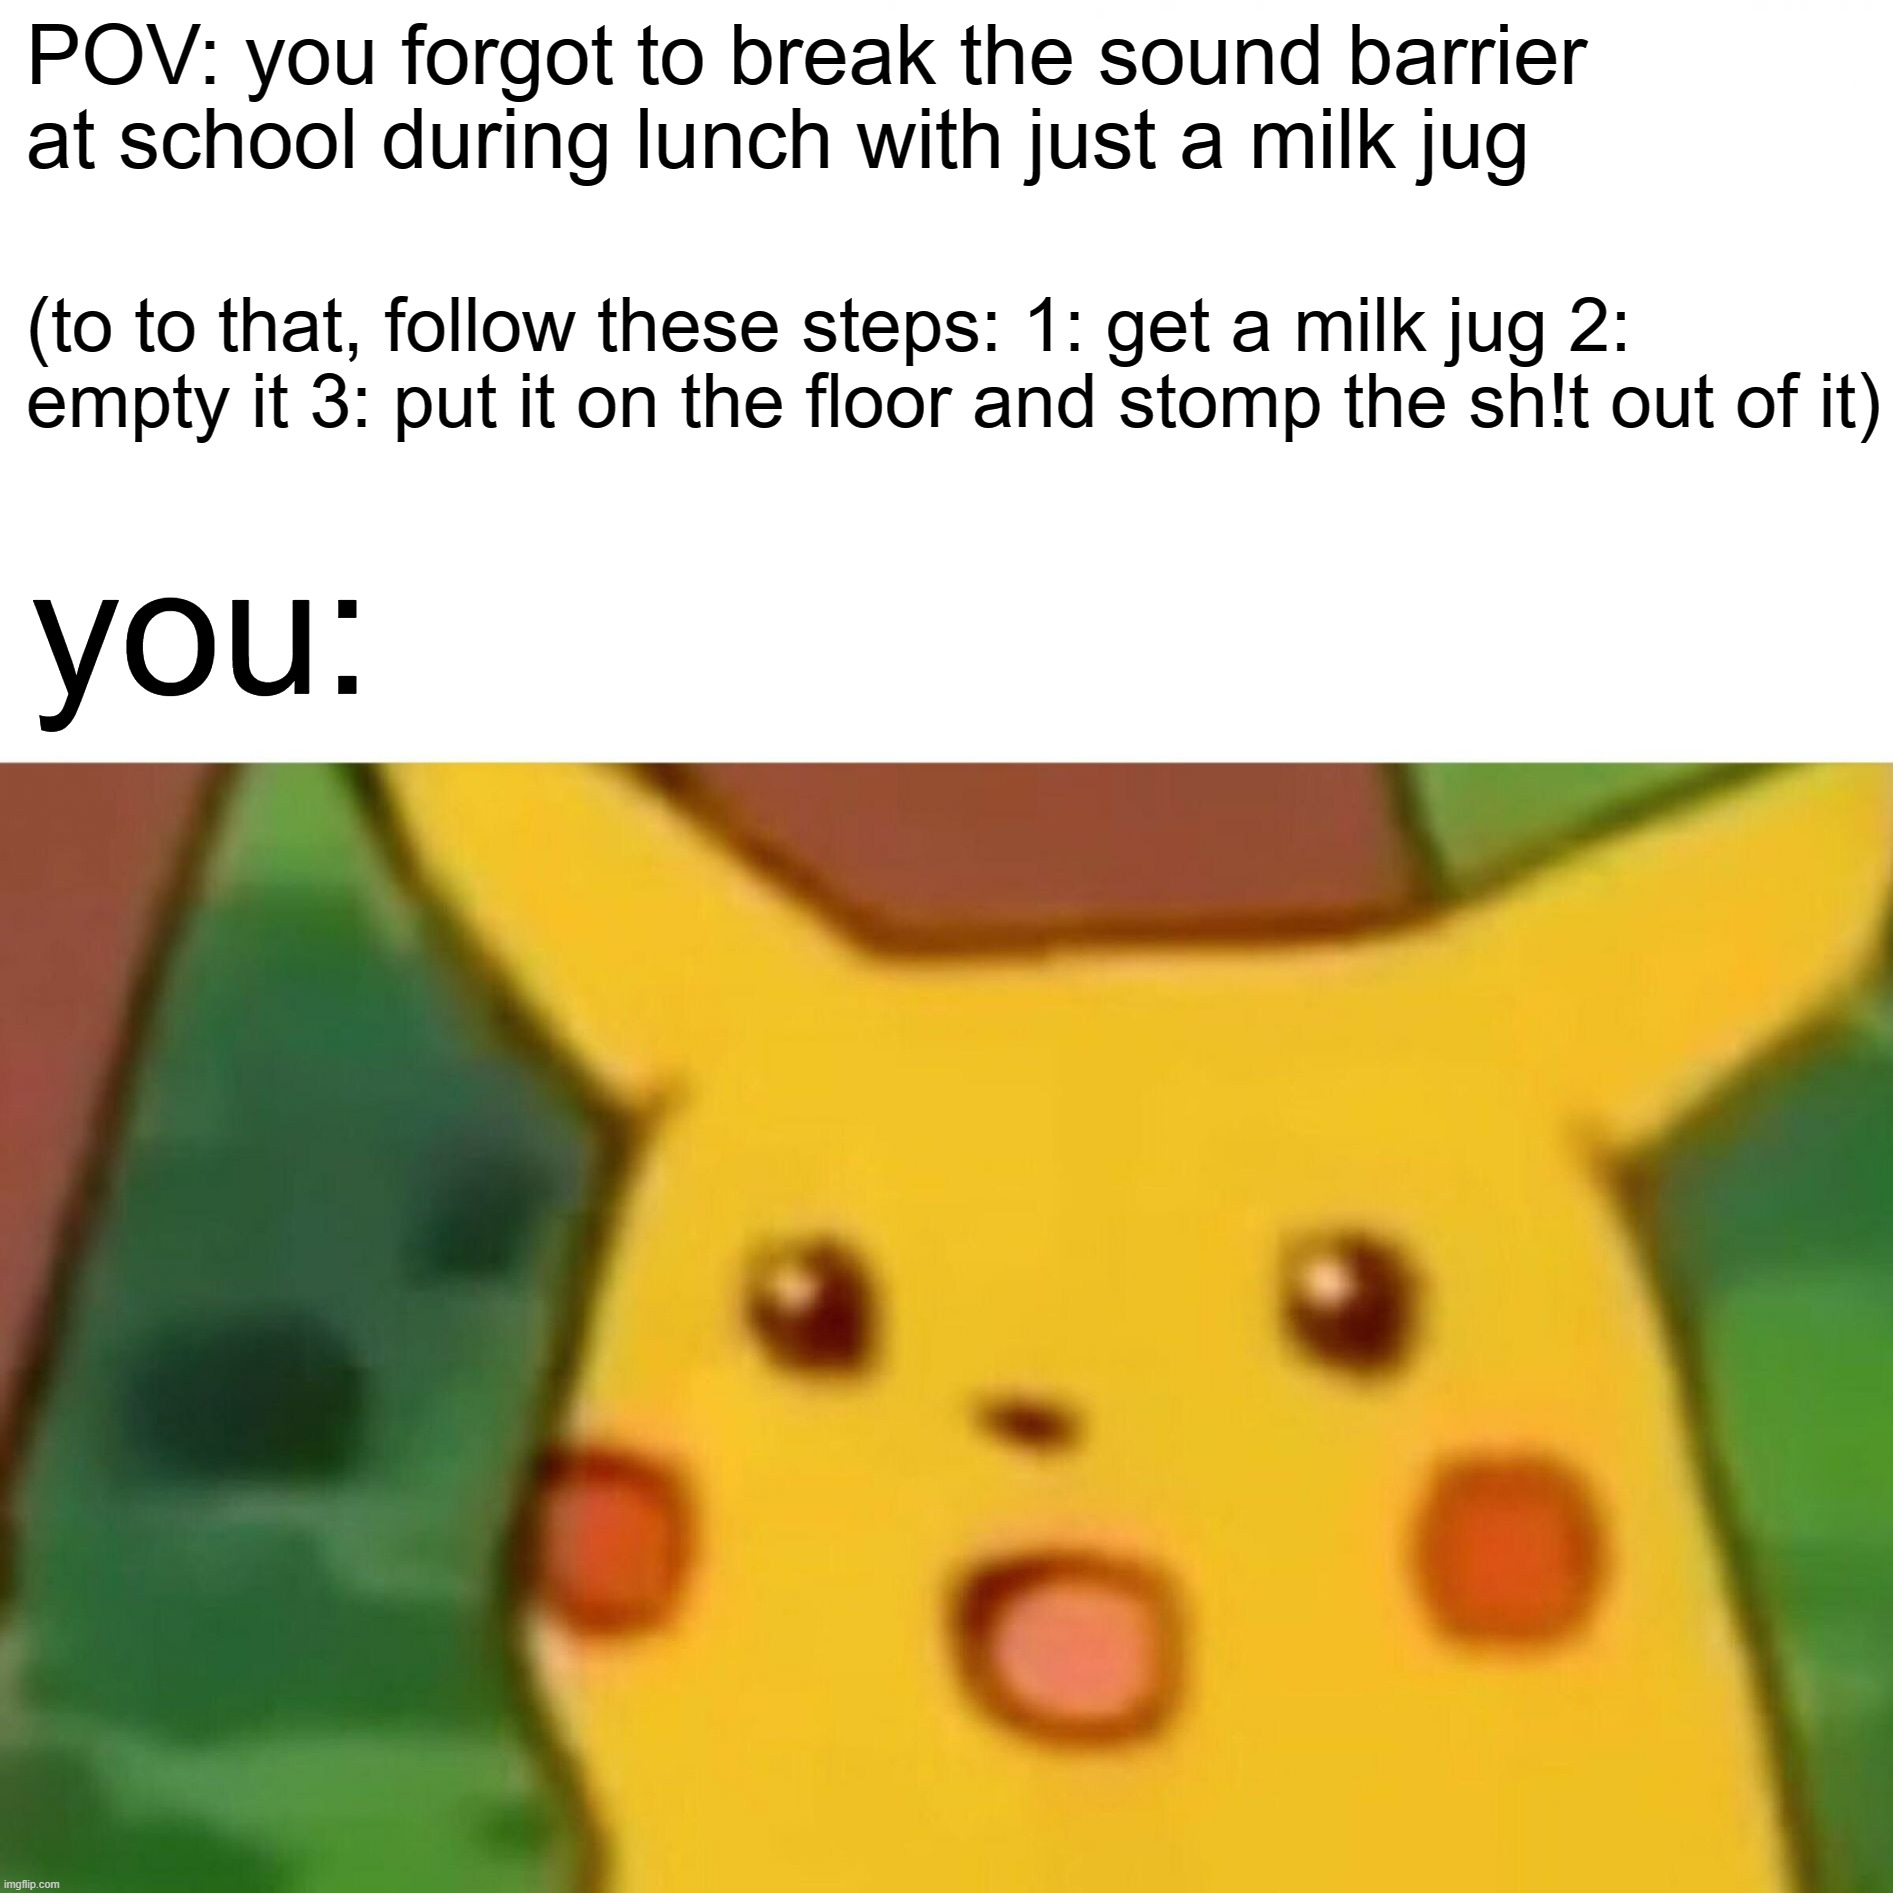 Surprised Pikachu | POV: you forgot to break the sound barrier at school during lunch with just a milk jug; (to to that, follow these steps: 1: get a milk jug 2: empty it 3: put it on the floor and stomp the sh!t out of it); you: | image tagged in memes,surprised pikachu | made w/ Imgflip meme maker